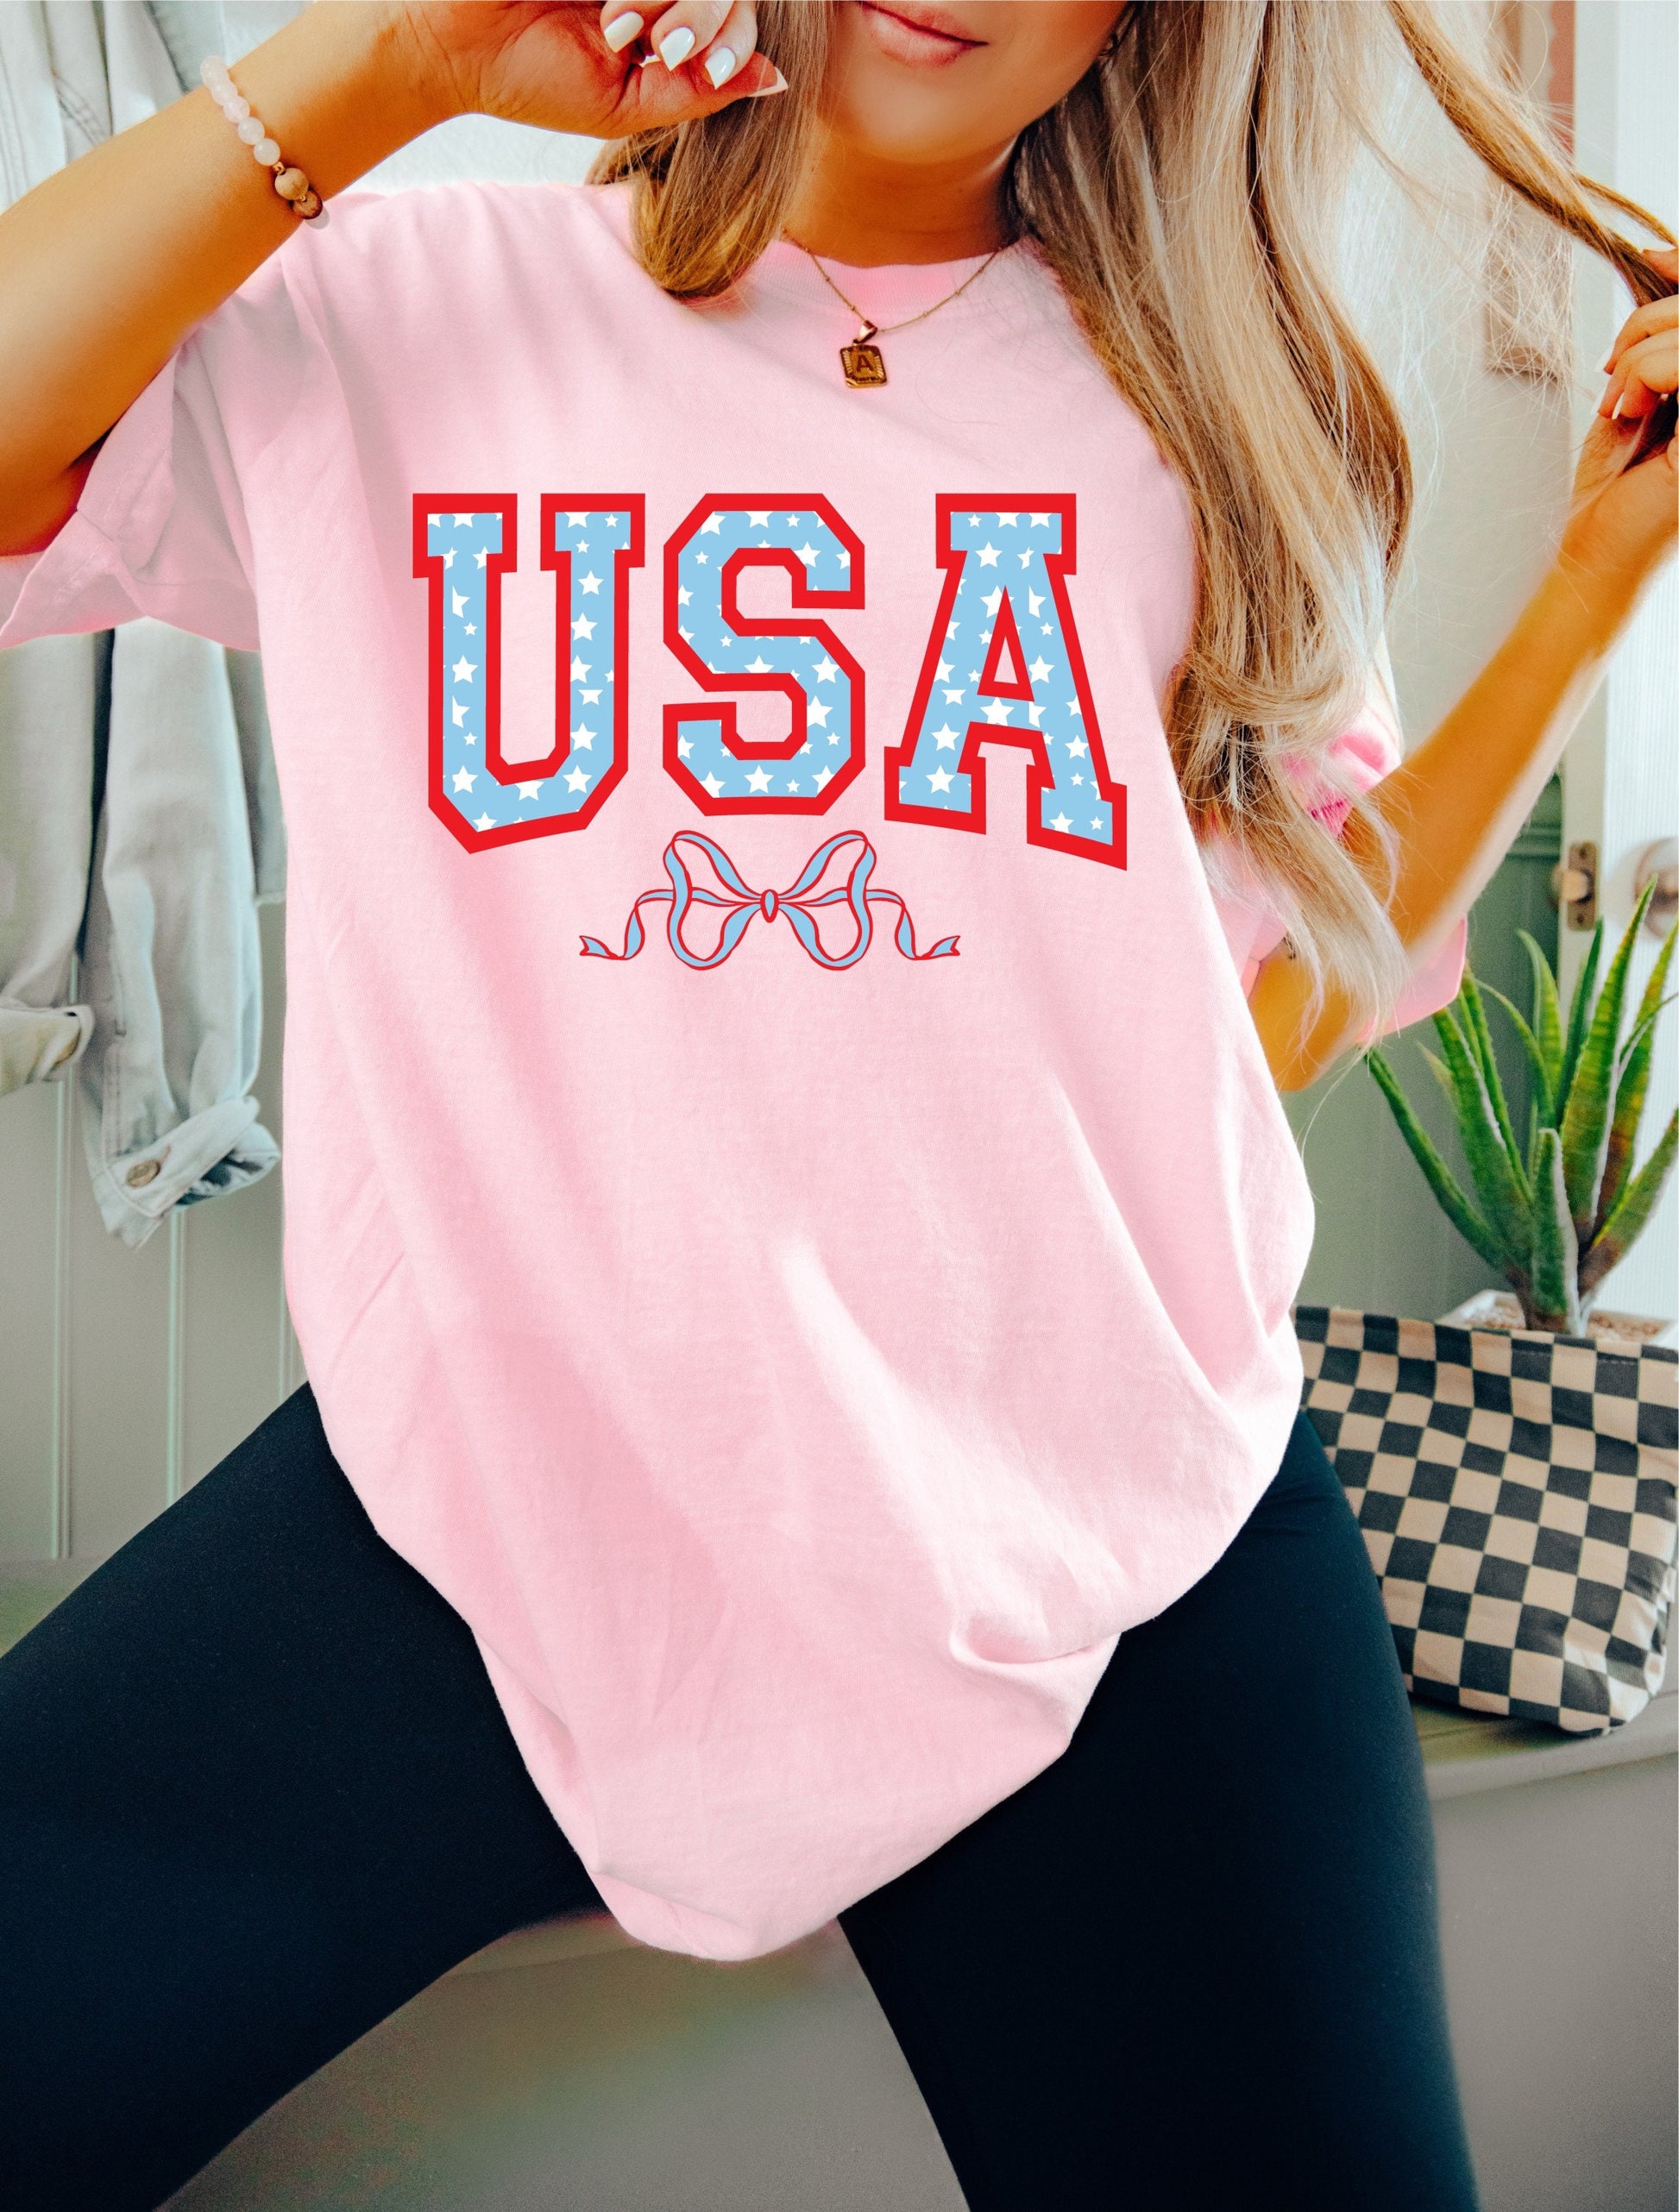 USA Coquette Bow July 4th Shirt, Coquette 4th of July Shirt, Retro 4th of July Shirt, Comfort Colors® Shirt, Summertime Tee Coquette Girly